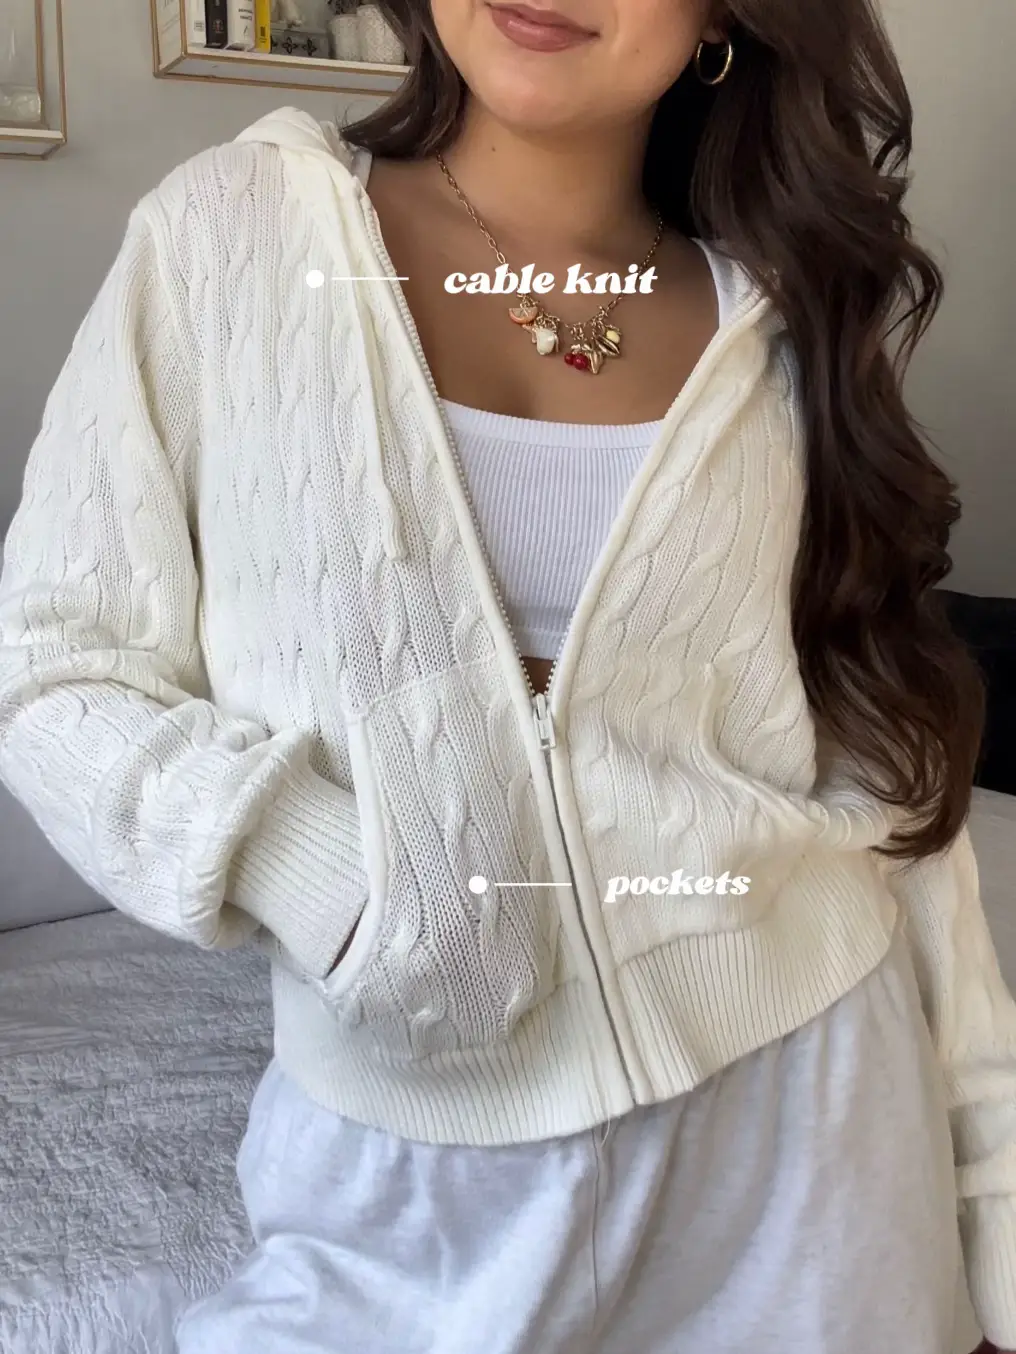 BRANDY MELVILLE SWEATERS HAUL, Gallery posted by riannagail